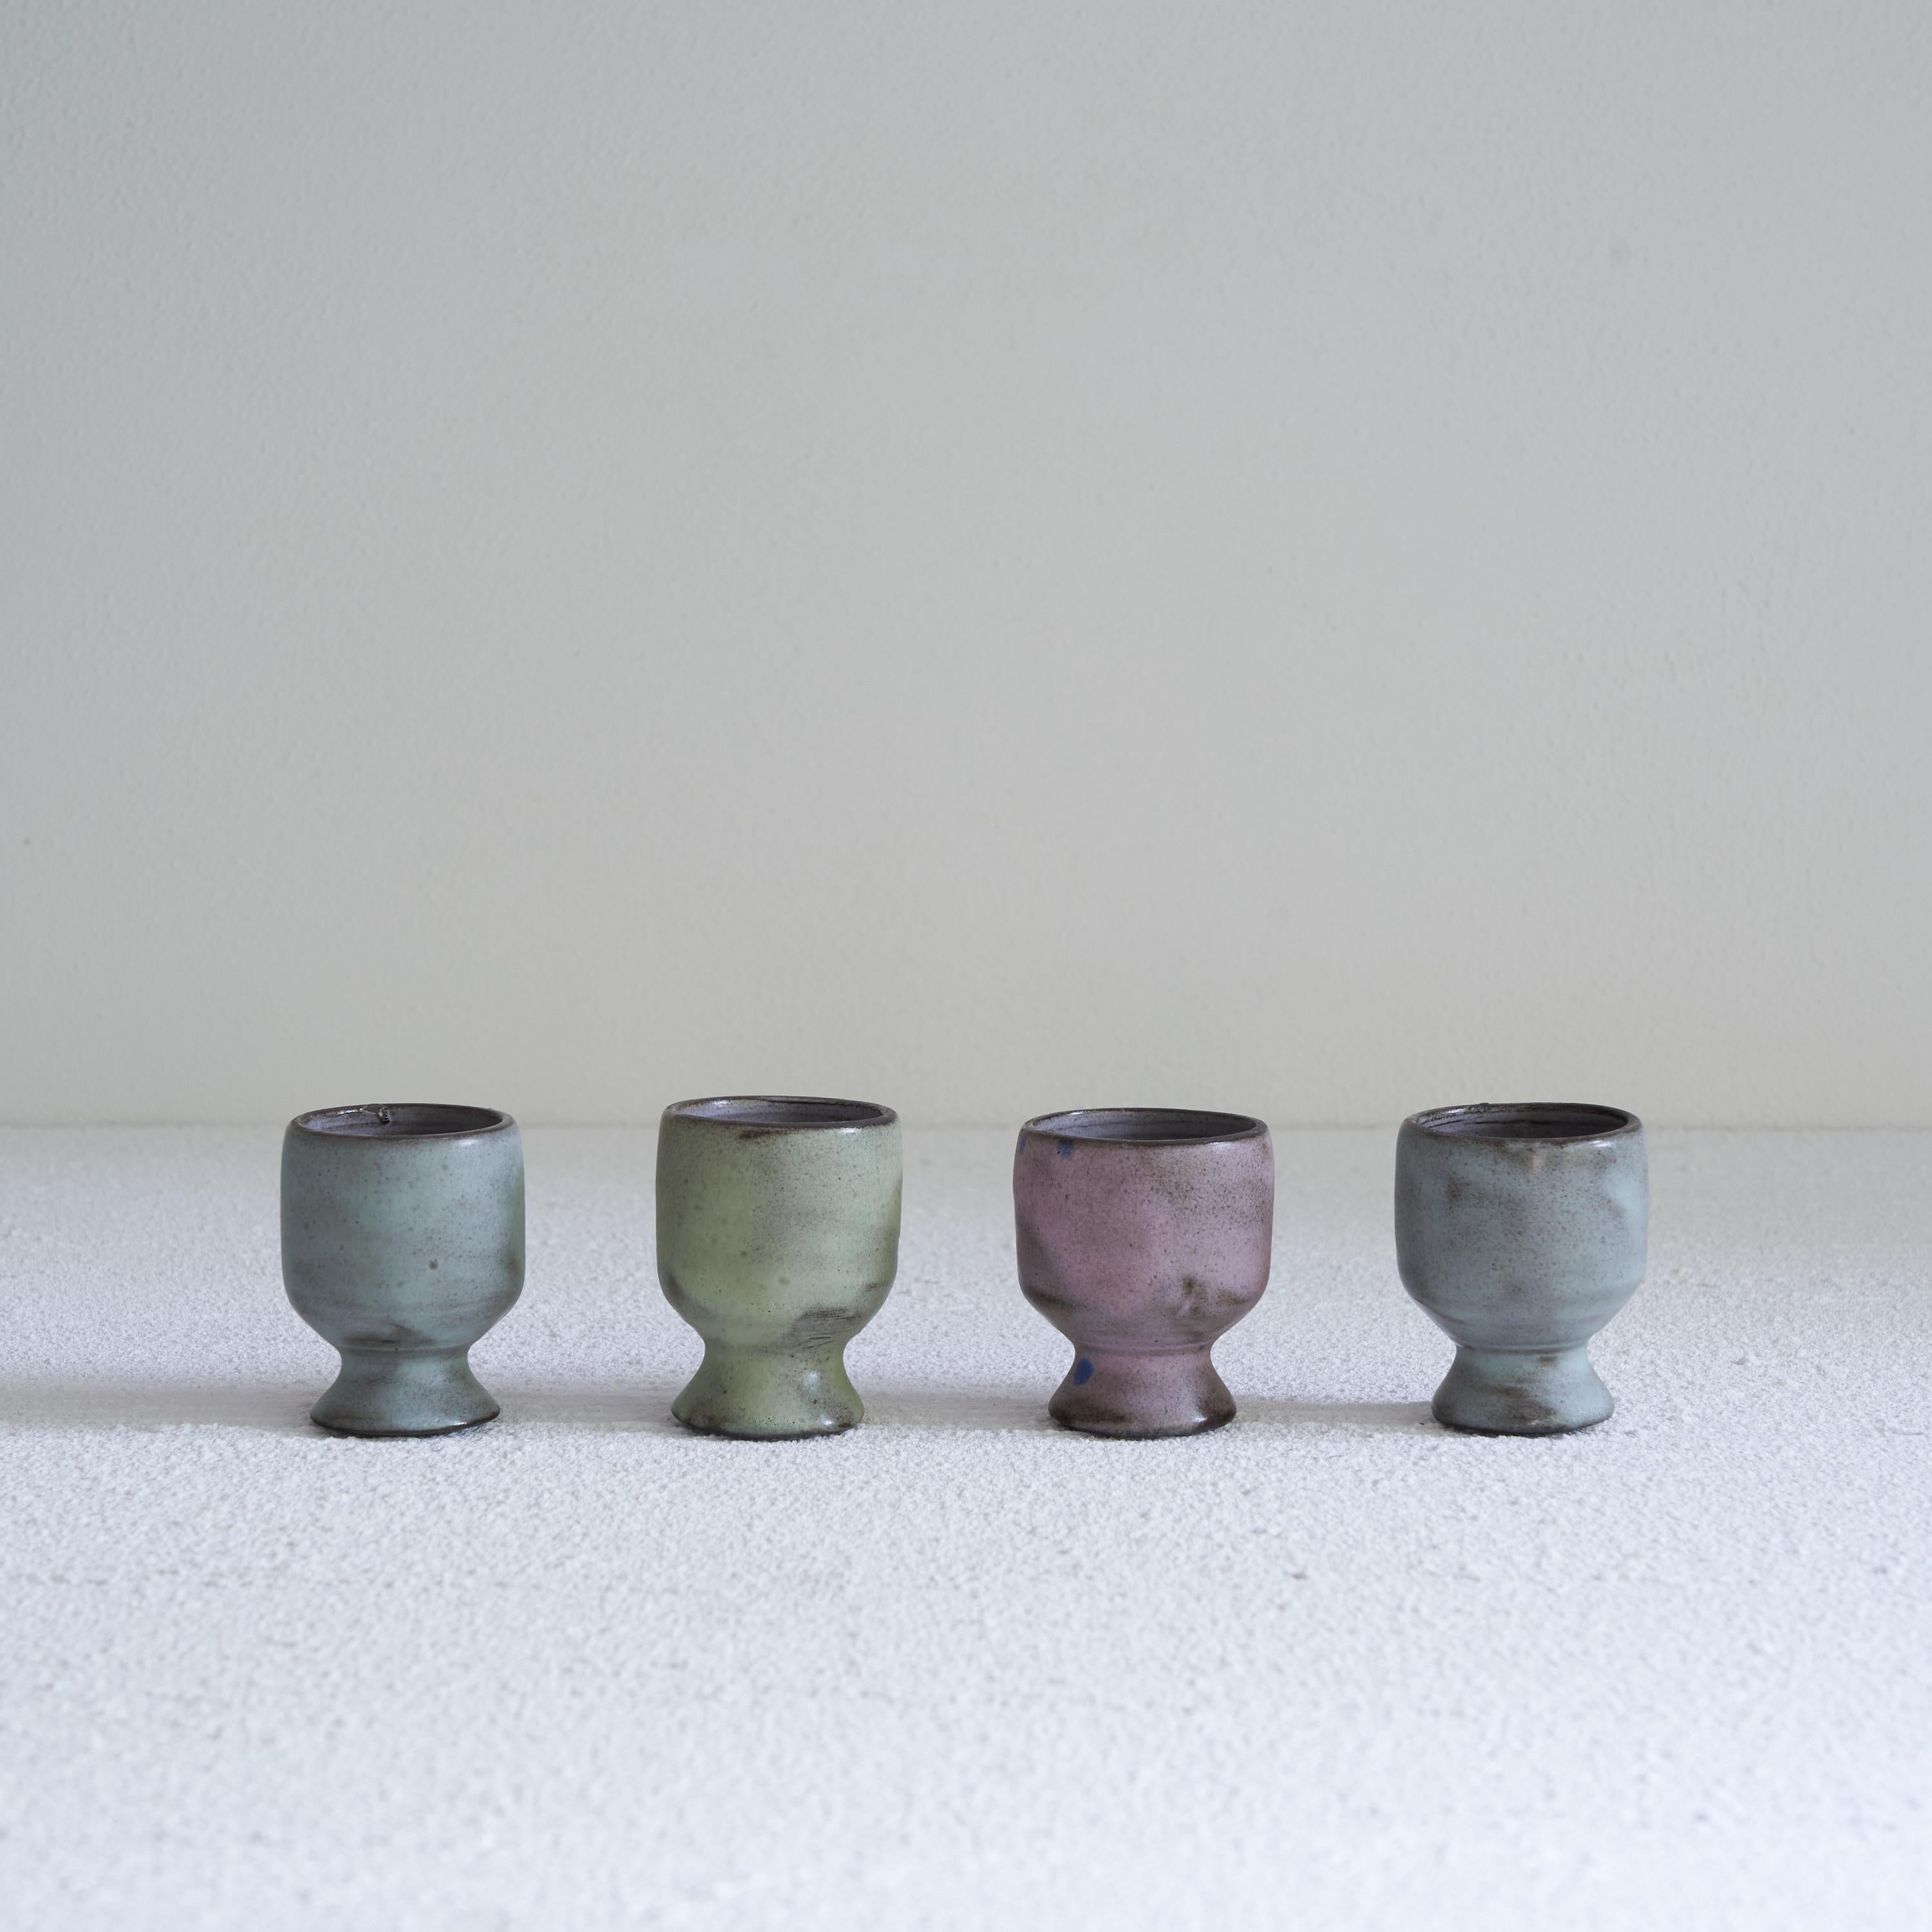 Mid Century Studio Pottery Egg Cups Set of 4. Mid 20th century.

Great set of 4 mid-century studio pottery egg cups. Hand made and wonderful in color, design and appearance. Every one has a different color, ranging from purple to green and blue.